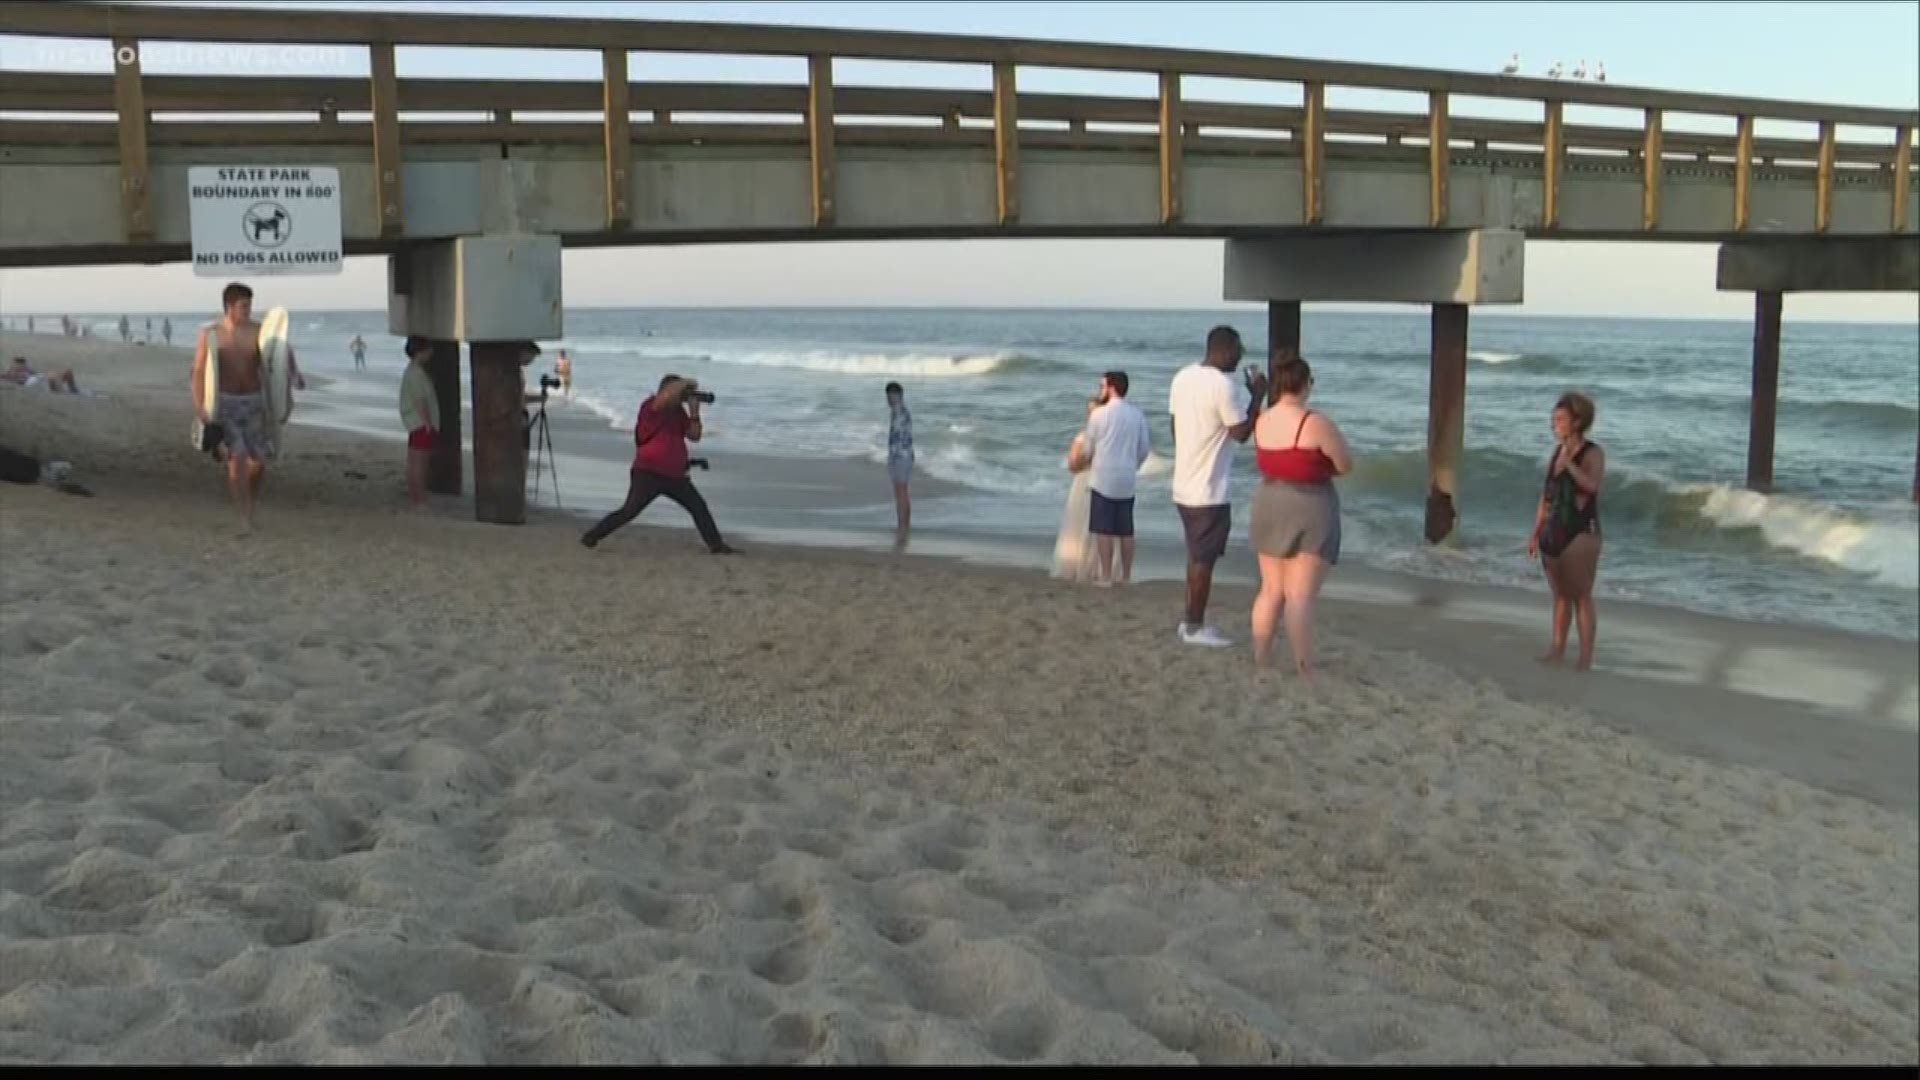 Local beachgoers flock to St. Augustine Beach after other beaches close to combat COVID-19 outbreak.